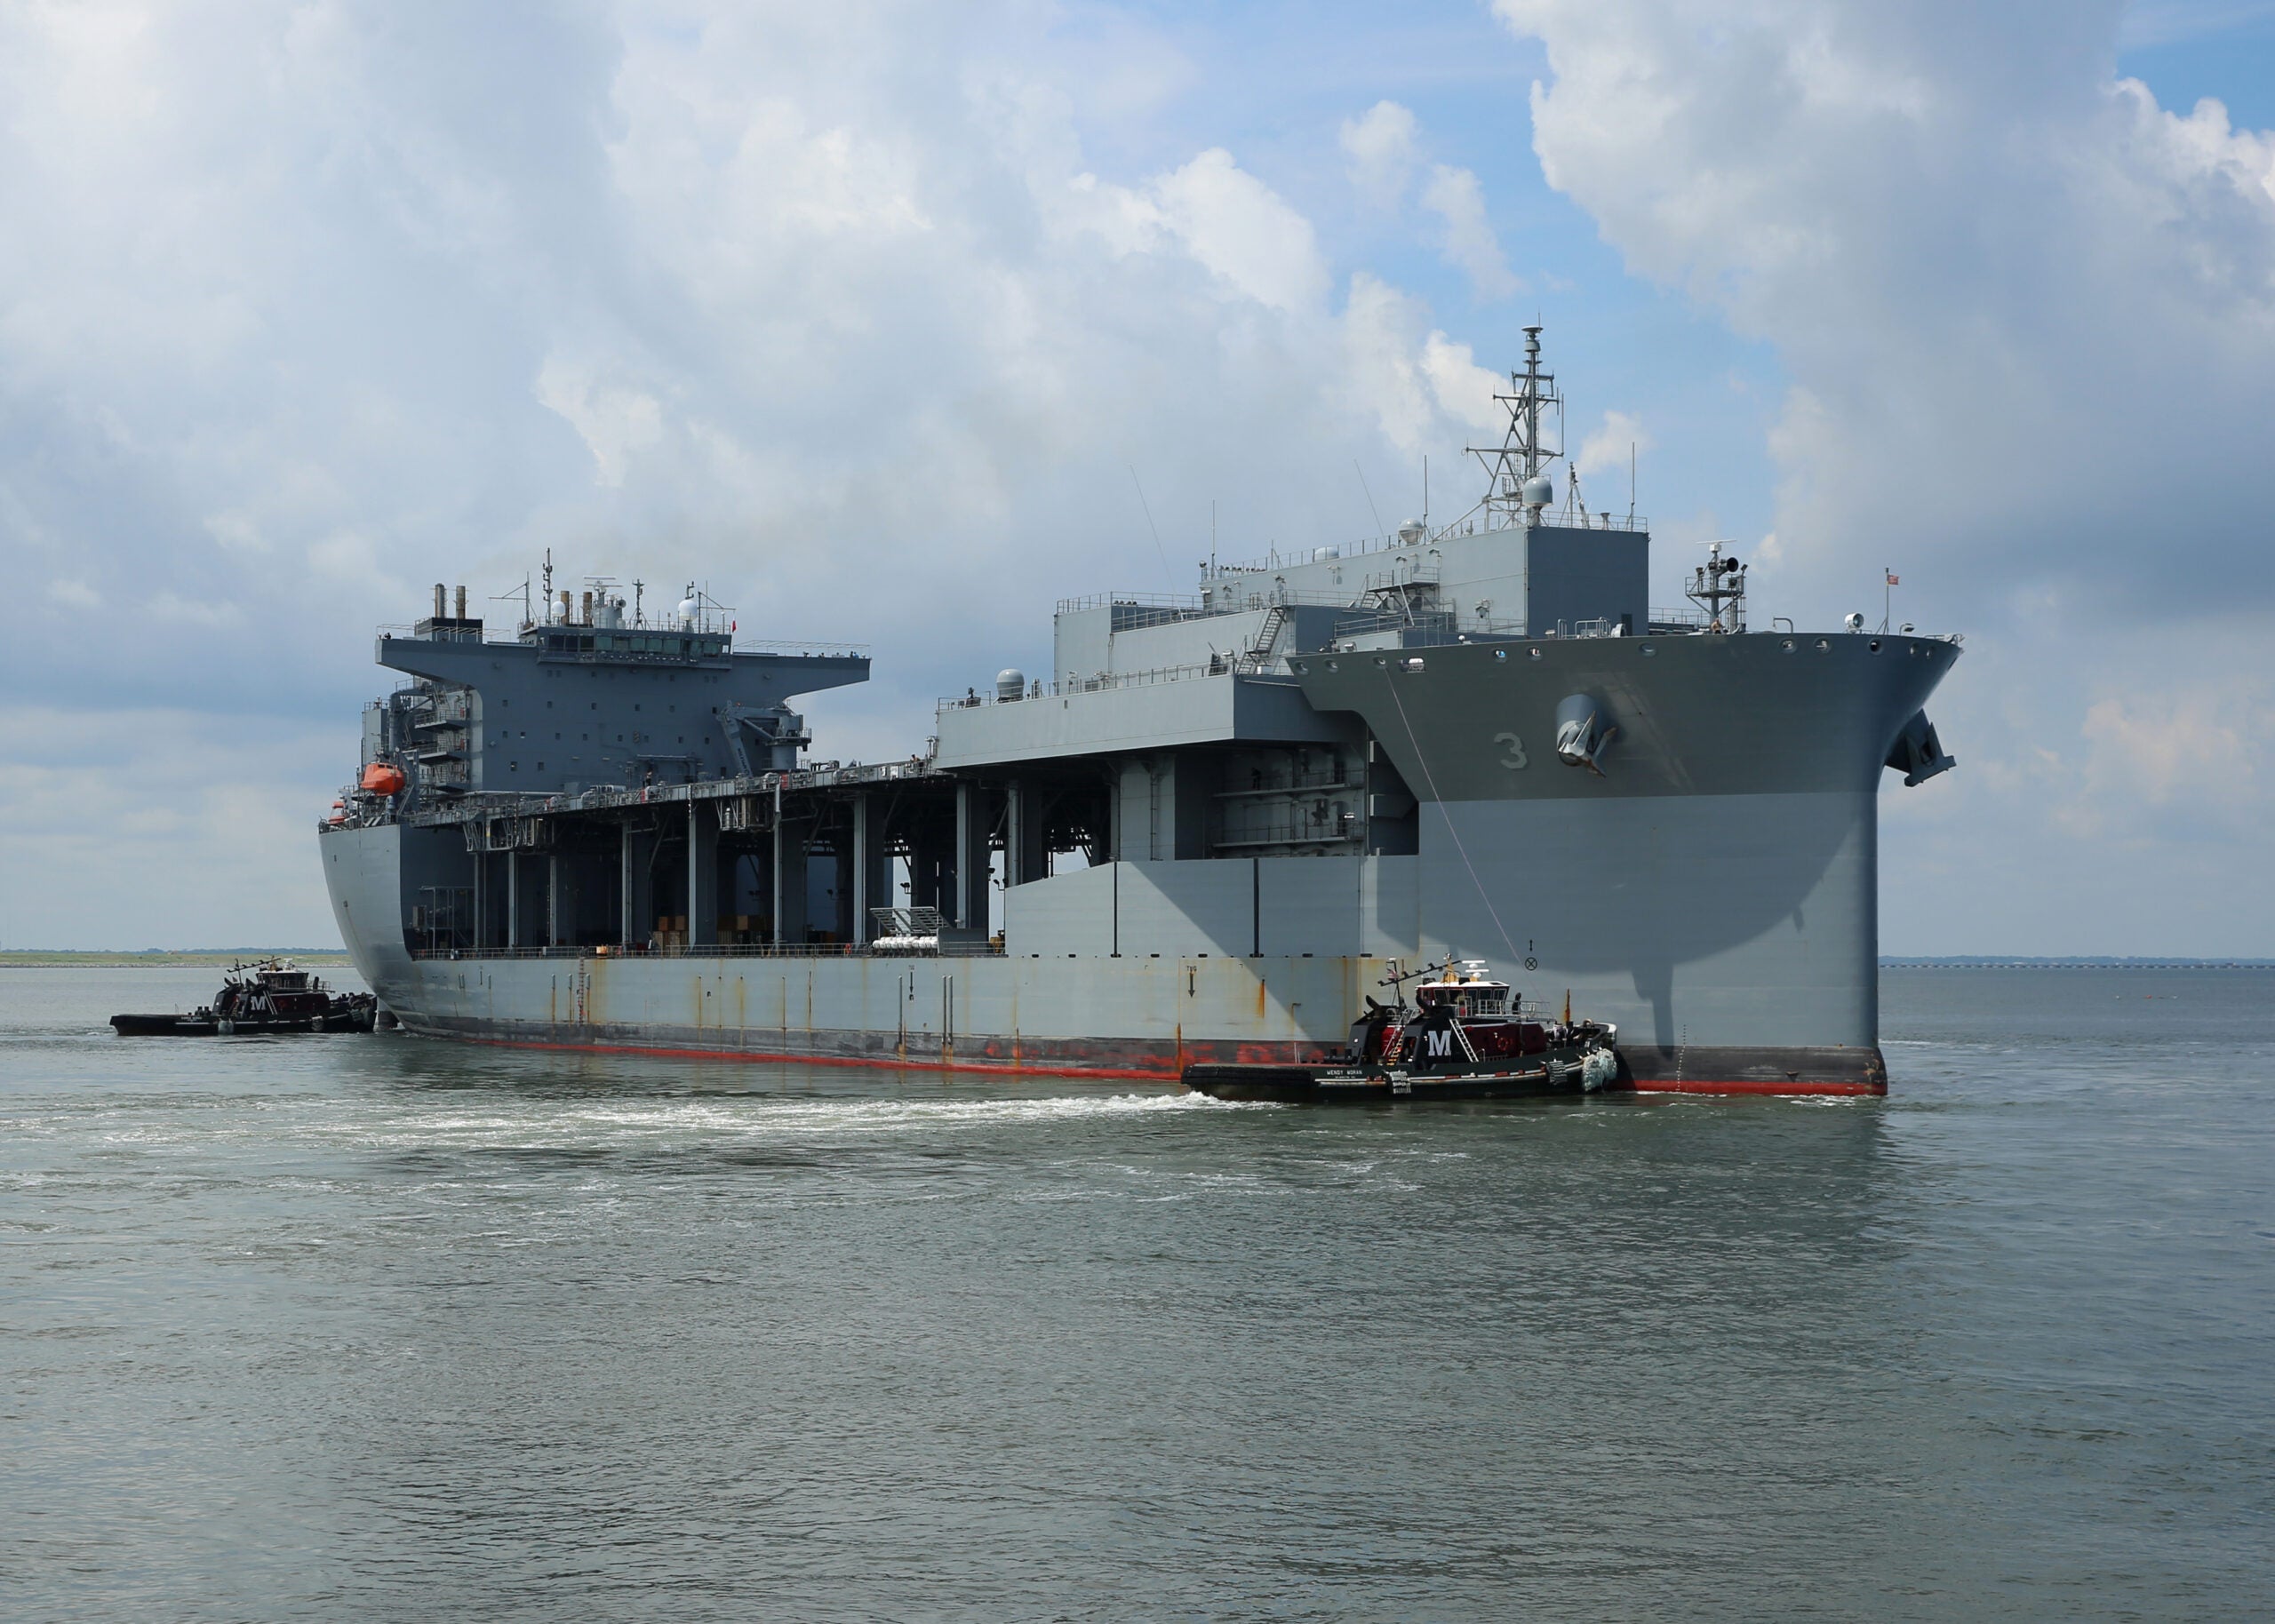 NORFOLK (July 10, 2017) The Military Sealift Command expeditionary mobile base USNS Lewis B. Puller (T-ESB 3) departs Naval Station Norfolk to begin its first operational deployment. Puller is deploying to the U.S. 5th Fleet area of operations in support of U.S. Navy and allied military efforts in the region. (U.S. Navy photo by Bill Mesta/Released)170710-N-OH262-448 
Join the conversation:
http://www.navy.mil/viewGallery.asp
http://www.facebook.com/USNavy
http://www.twitter.com/USNavy
http://navylive.dodlive.mil
http://pinterest.com
https://plus.google.com